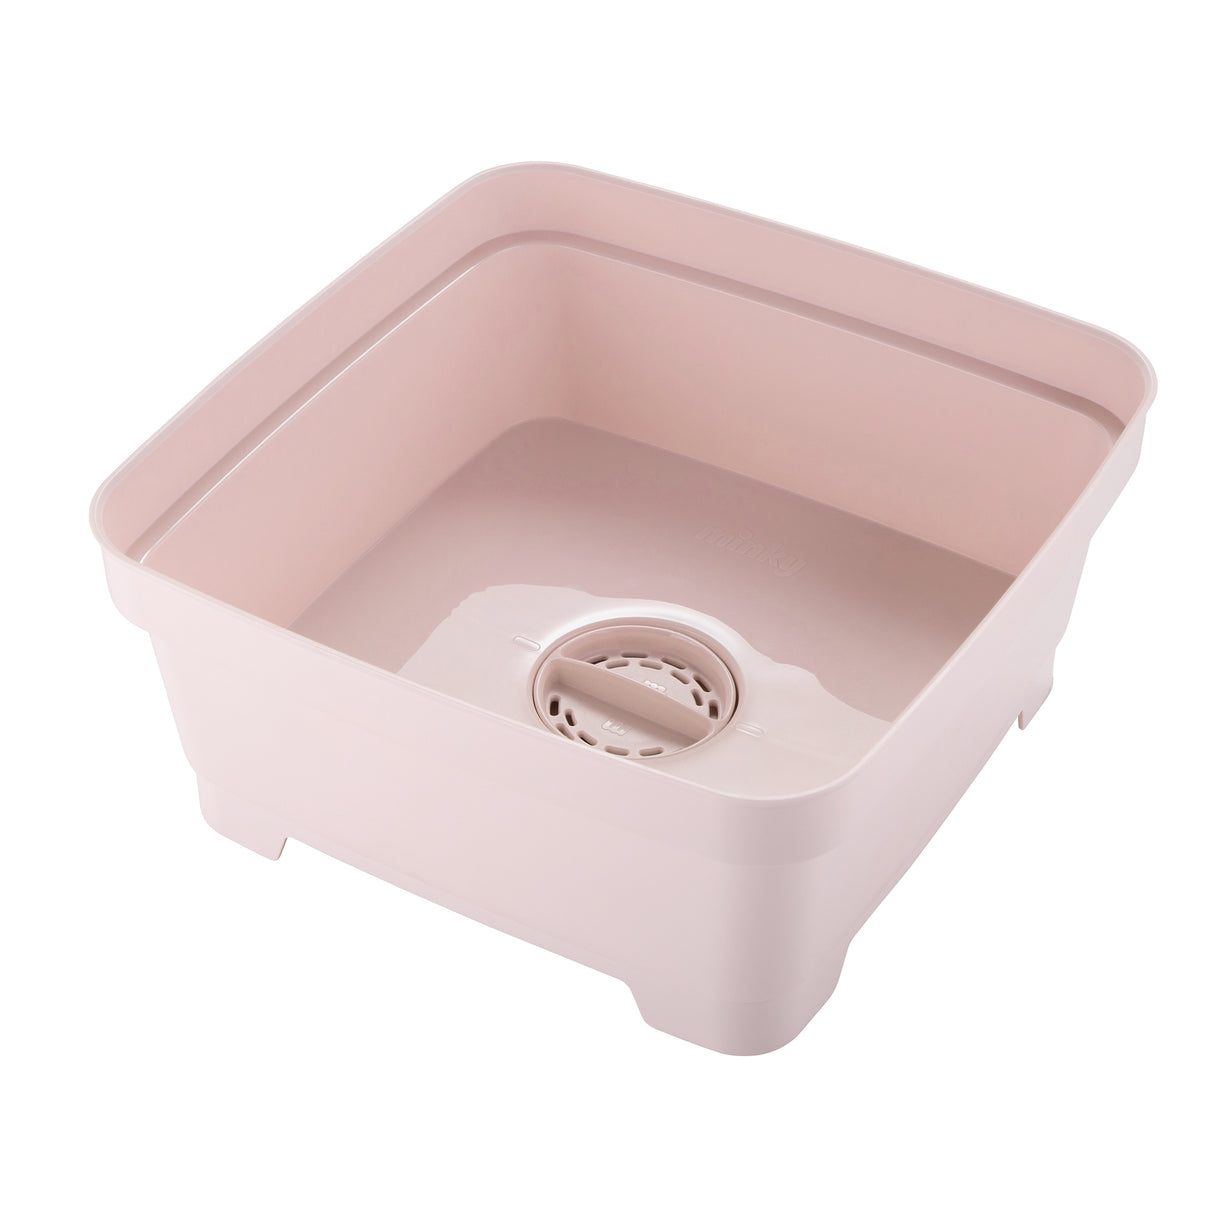 Minky Washing Up Bowl with Sink Plug Strainer